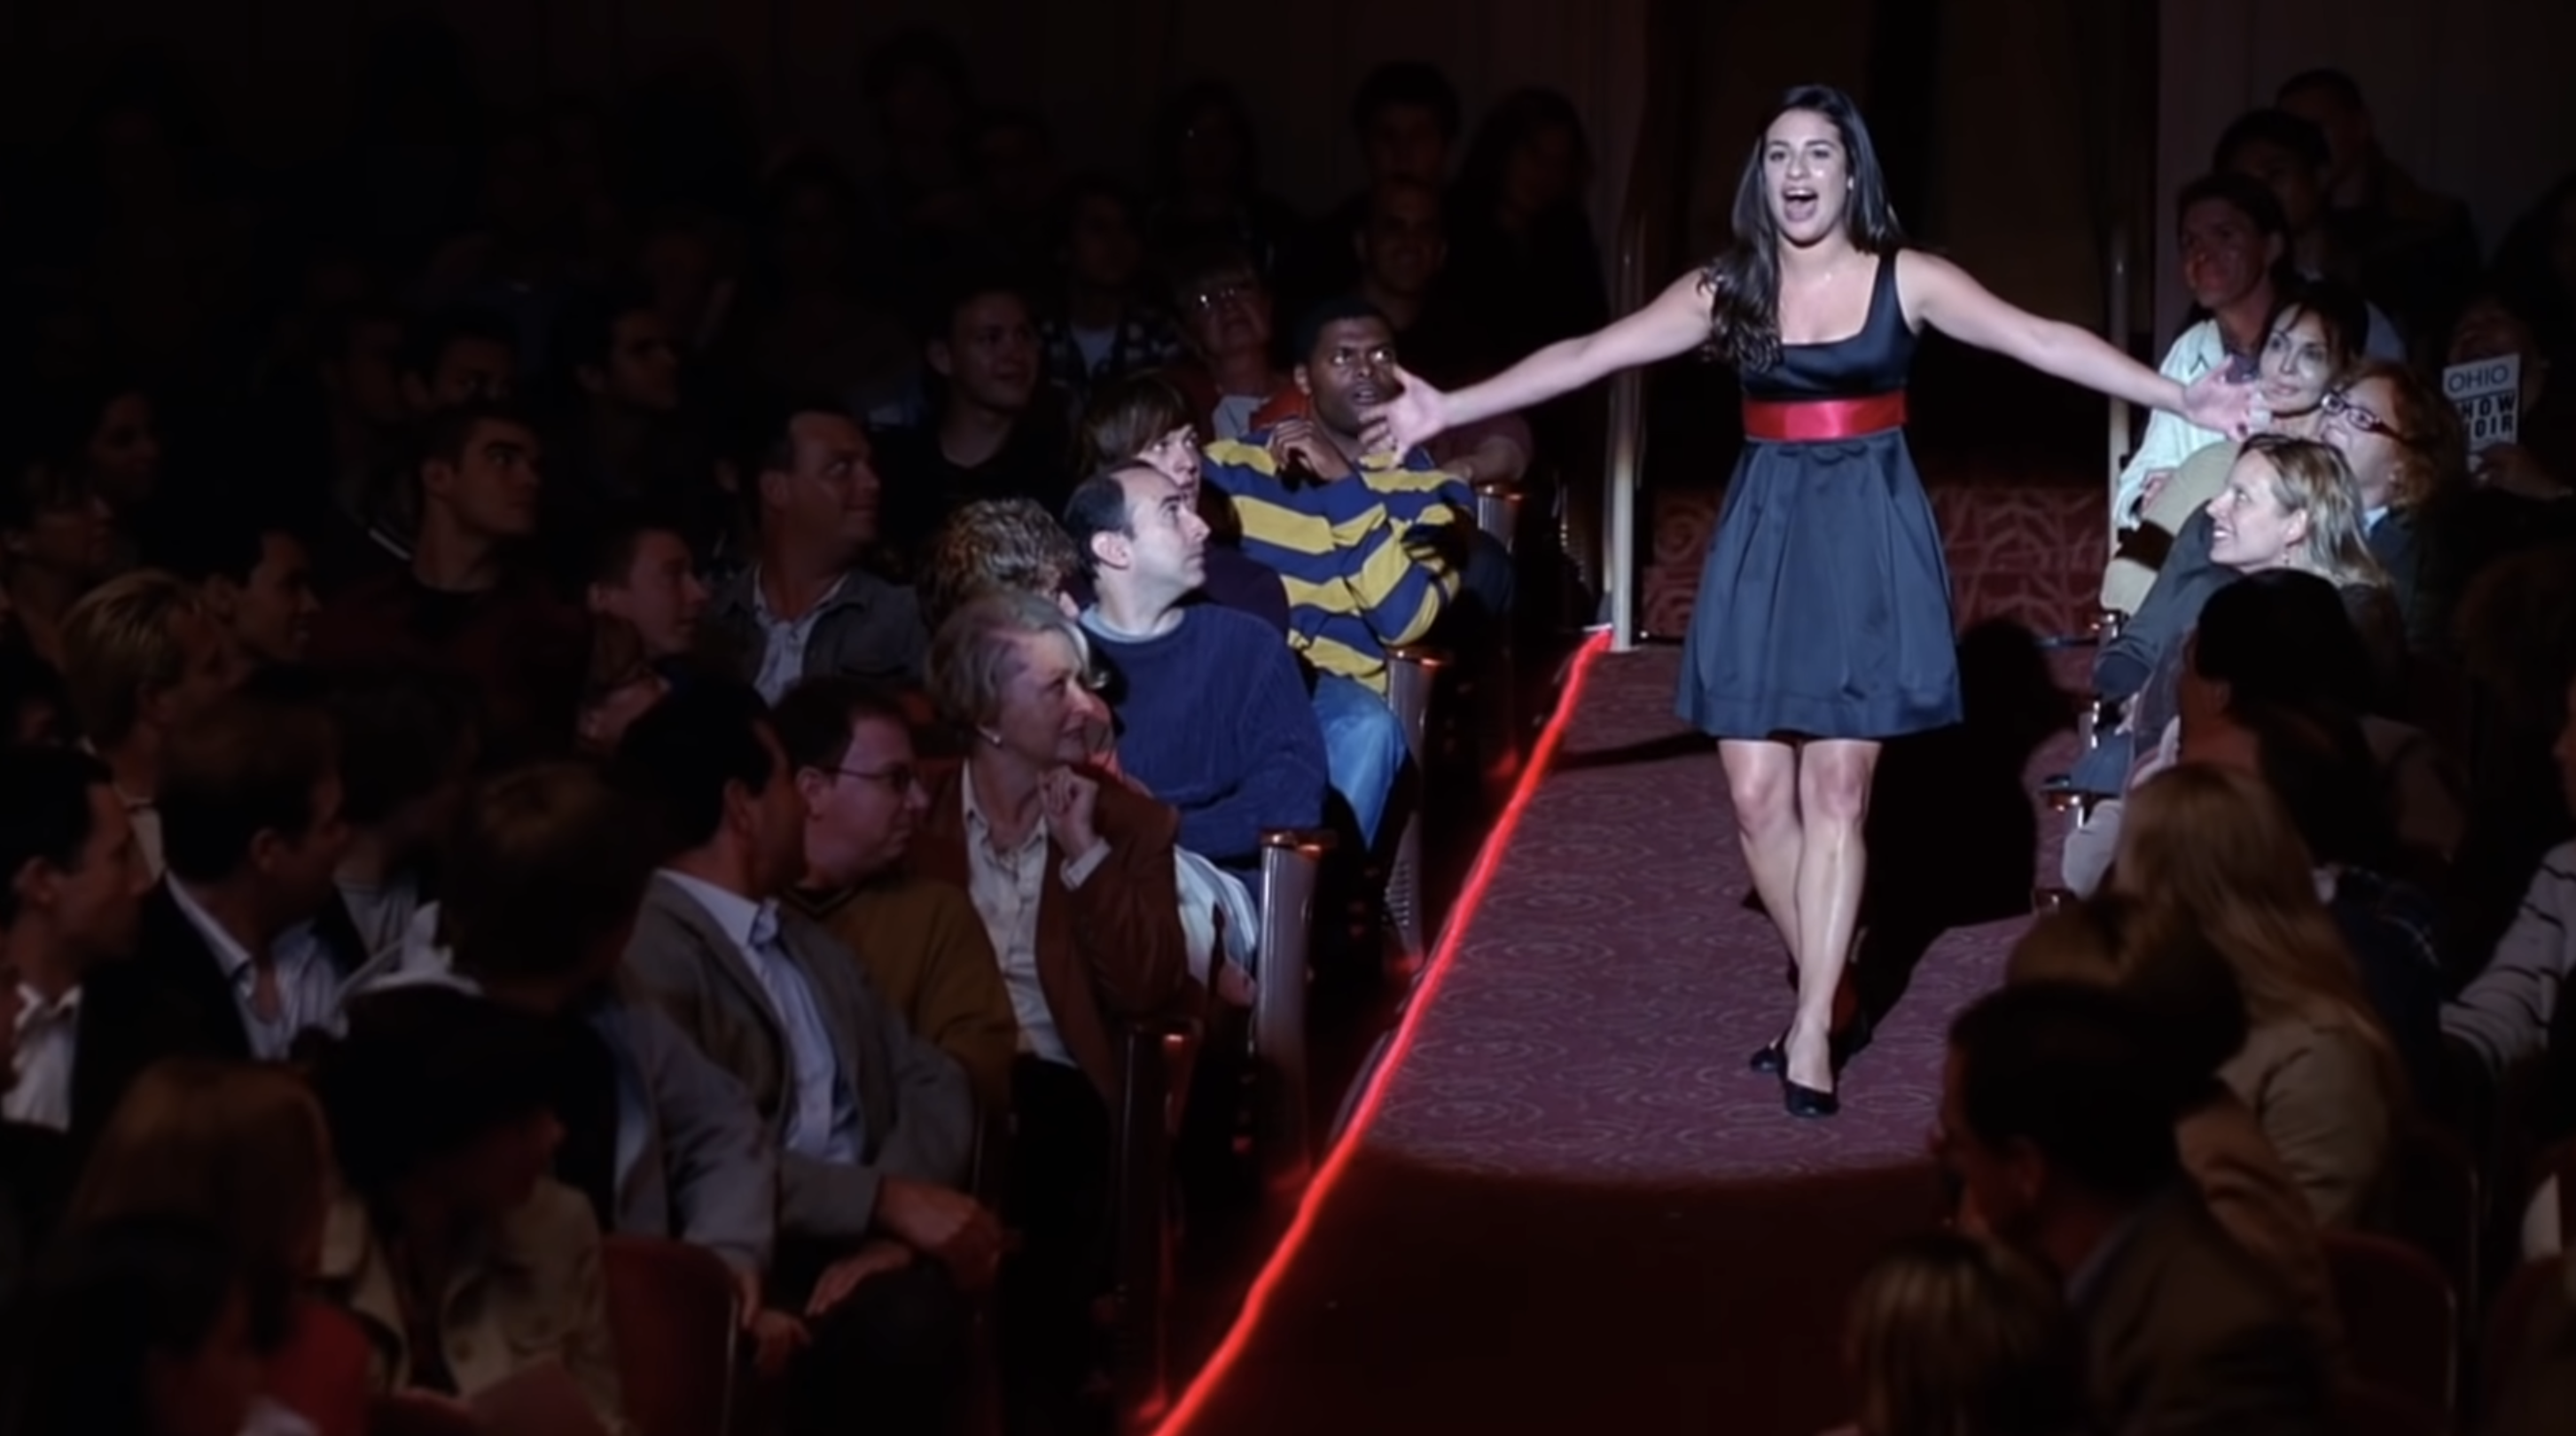 Woman in a fashion show reaching out to audience wearing a chic dress with a red belt